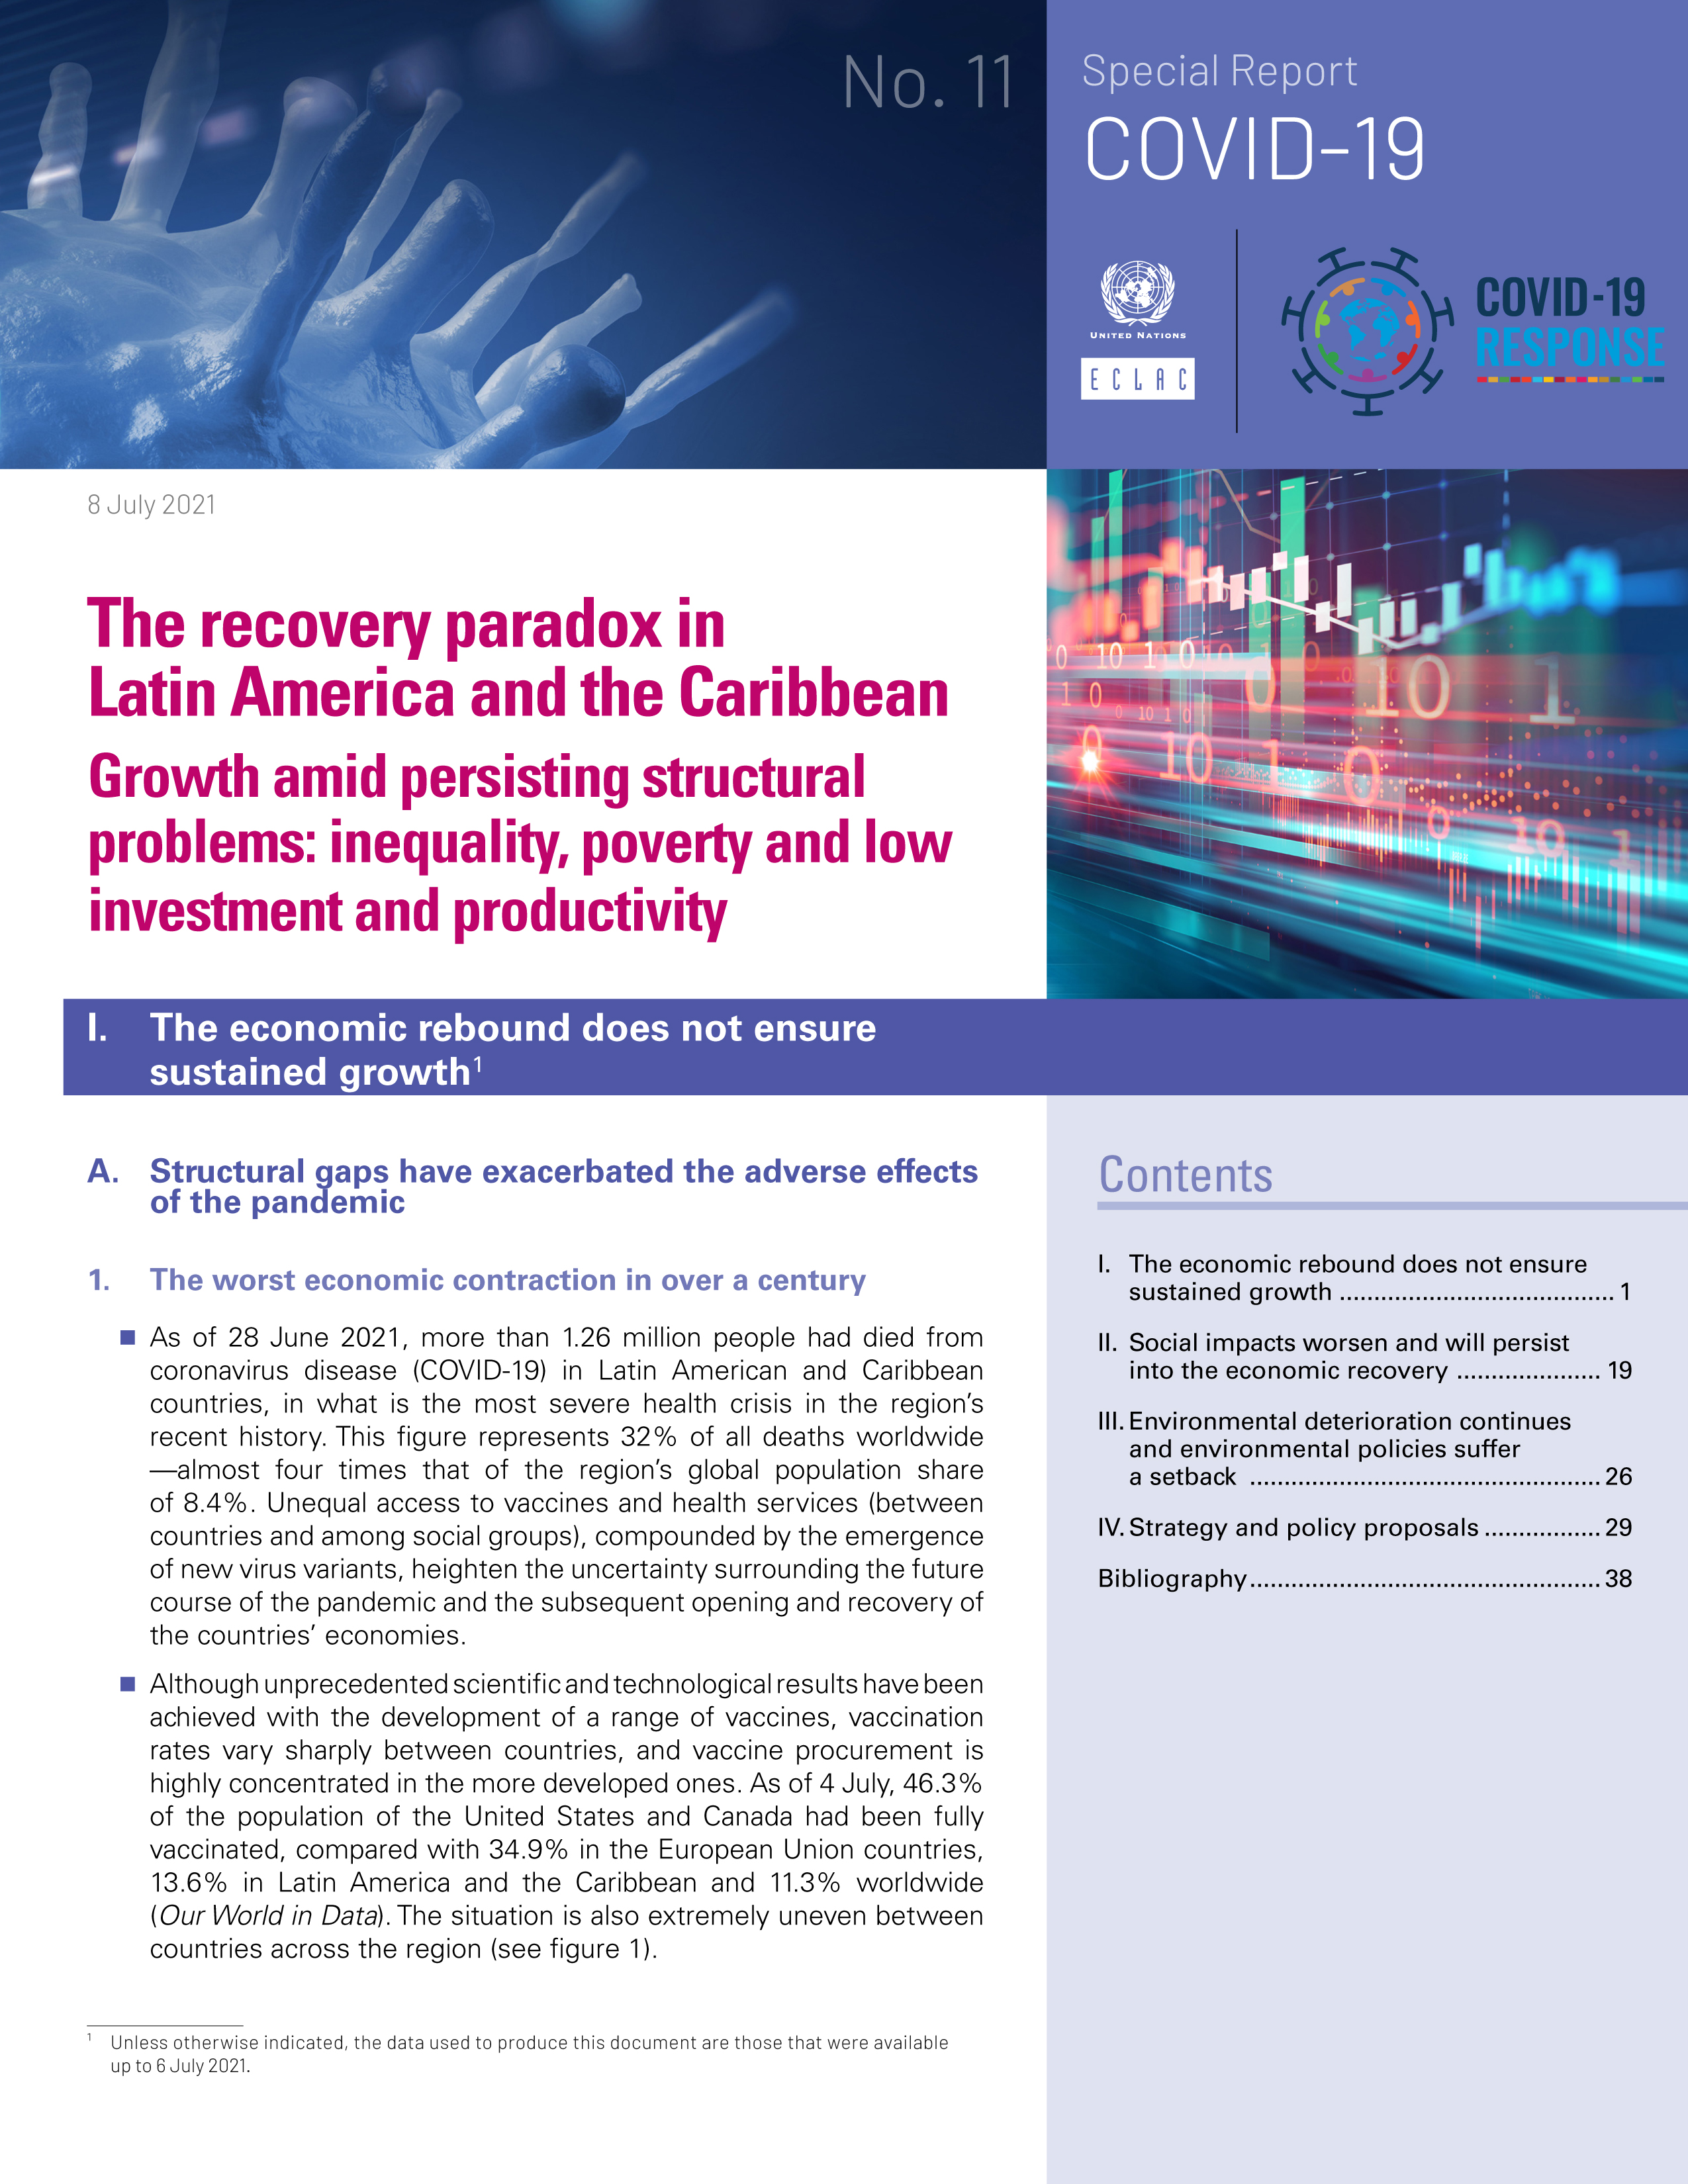 image of The Recovery Paradox in Latin America and the Caribbean Growth Amid Persisting Structural Problems